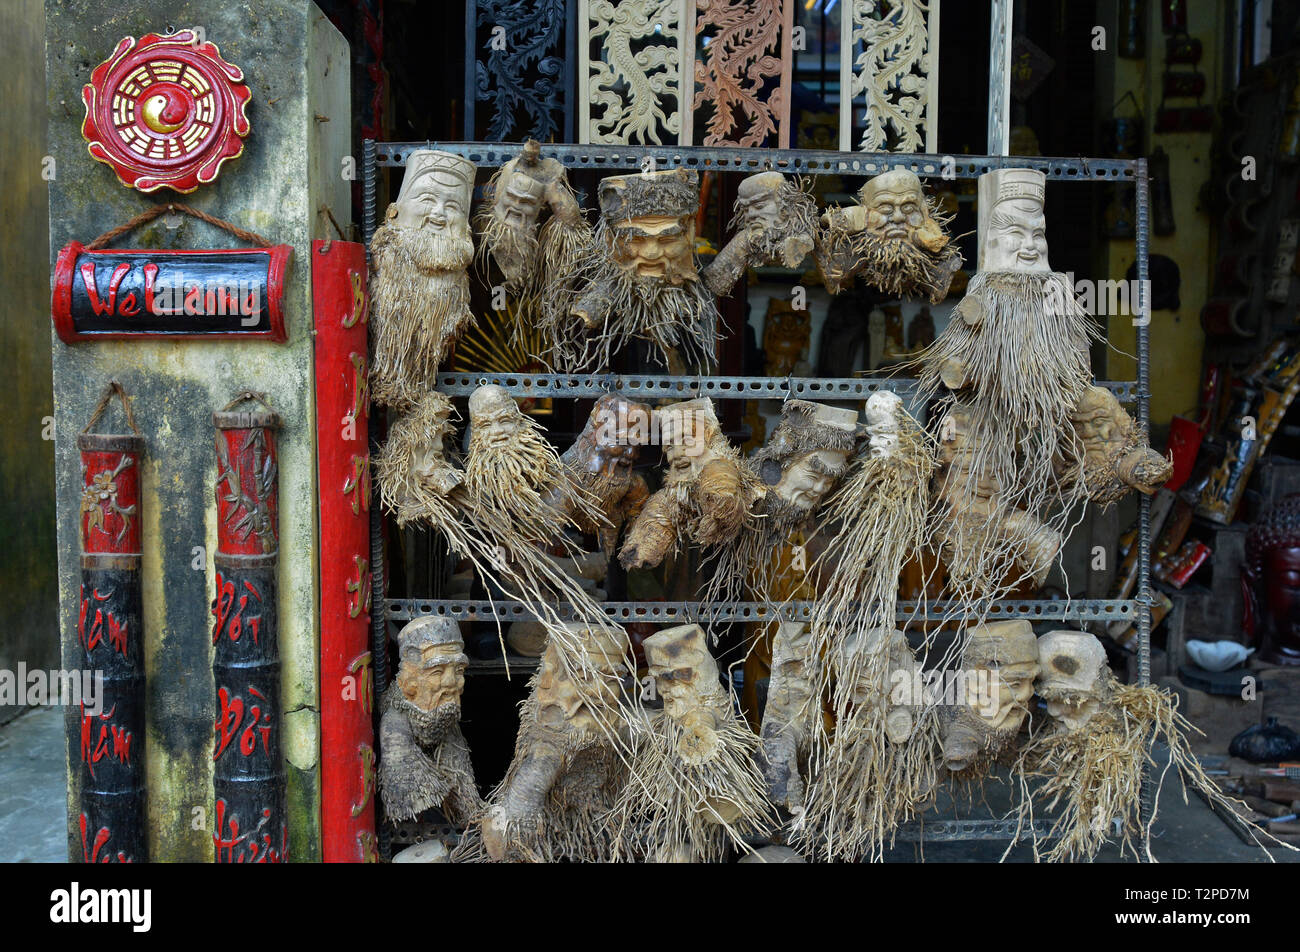 Hoi An, Vietnam - December 20th 2017. Souviners for sale outside a tourist shop in Hoi An. These are plant and tree roots carved with faces Stock Photo